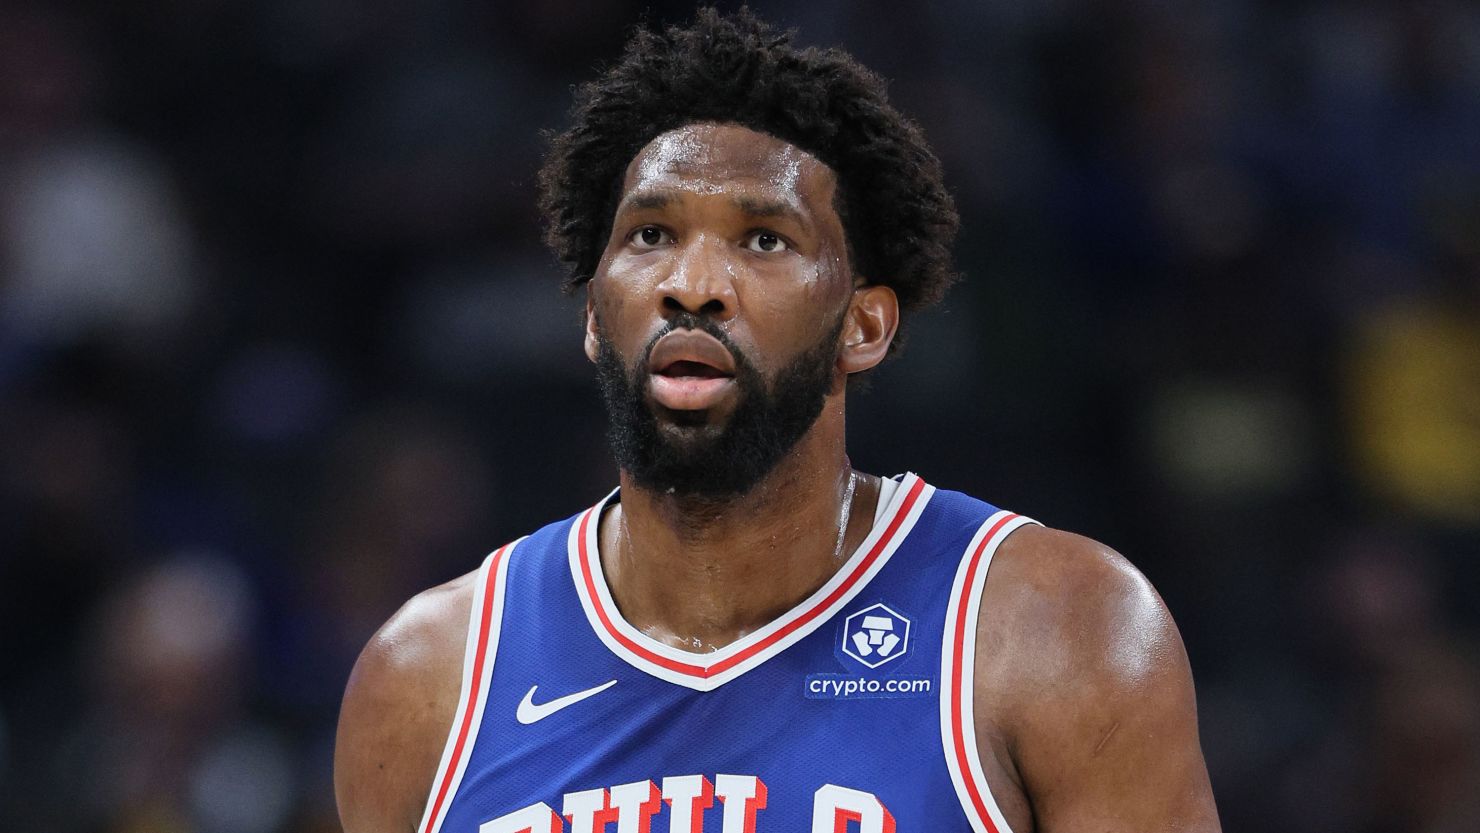 In a major blow to the 76ers, Embiid's latest injury required a “corrective procedure.”